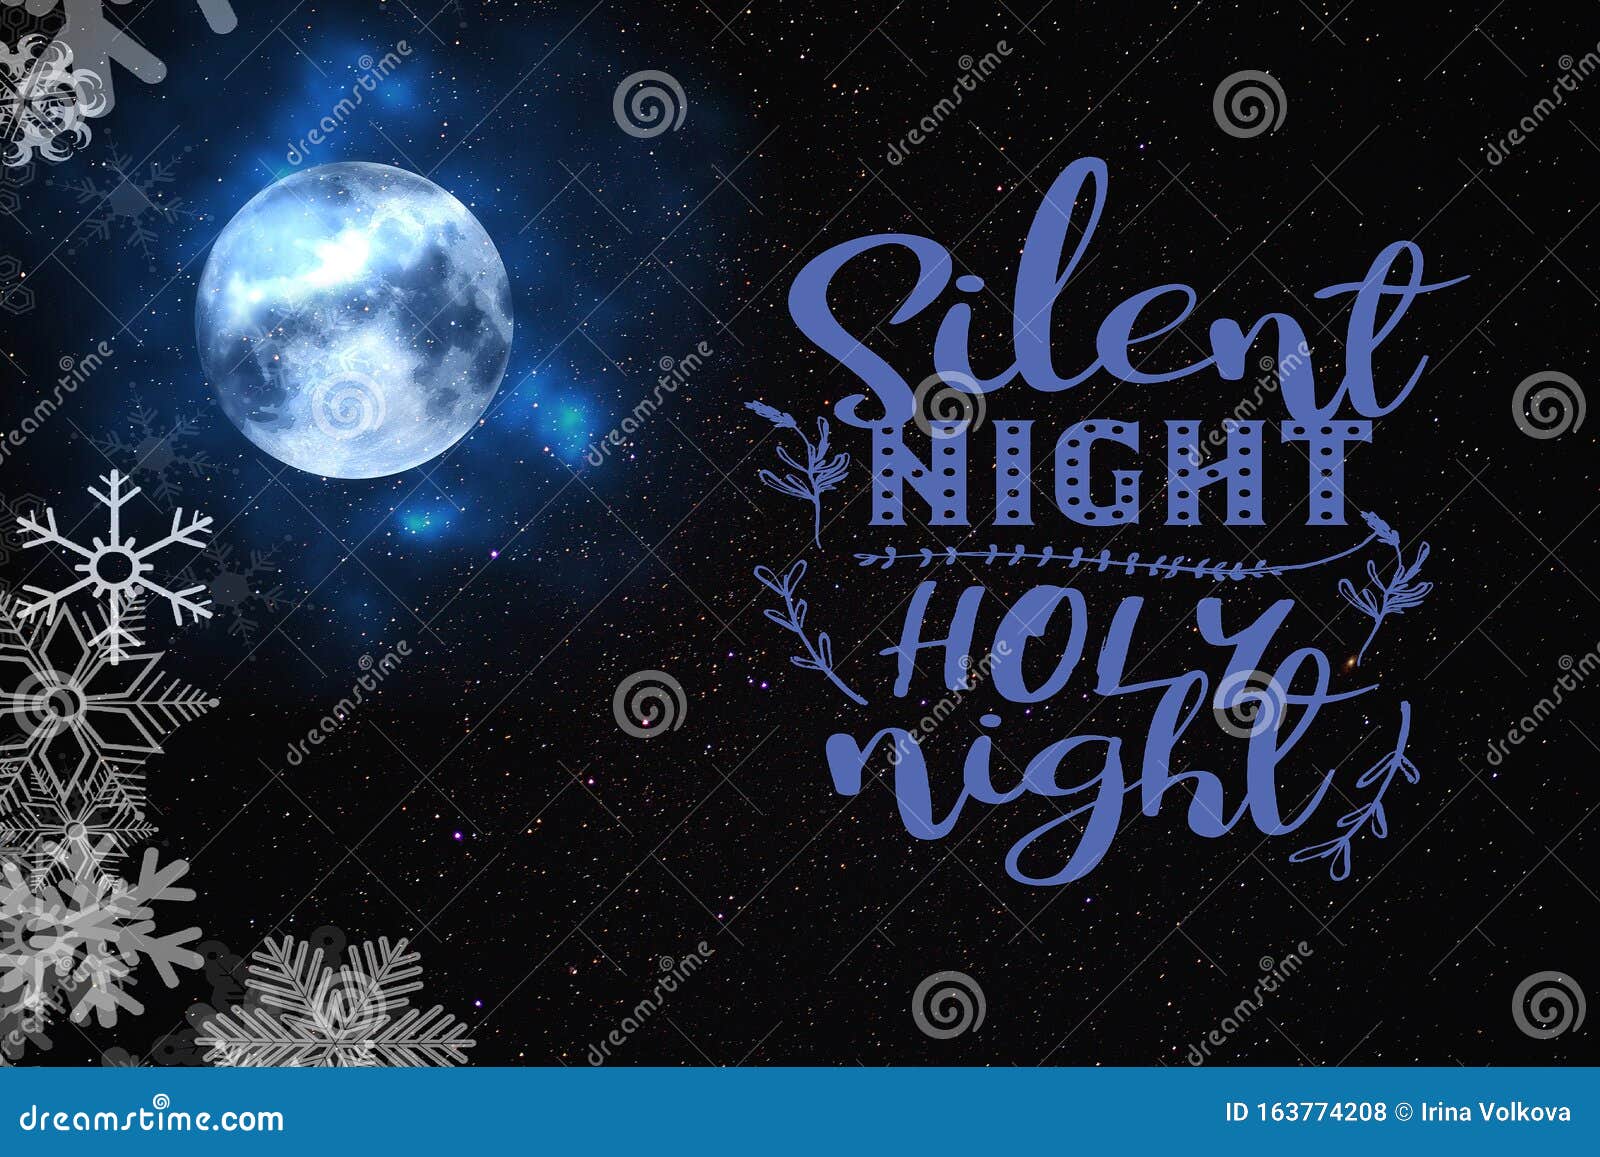 silent night holy night   christmas holiday  wishes quotes moon on starry sky greeting card banner copy space